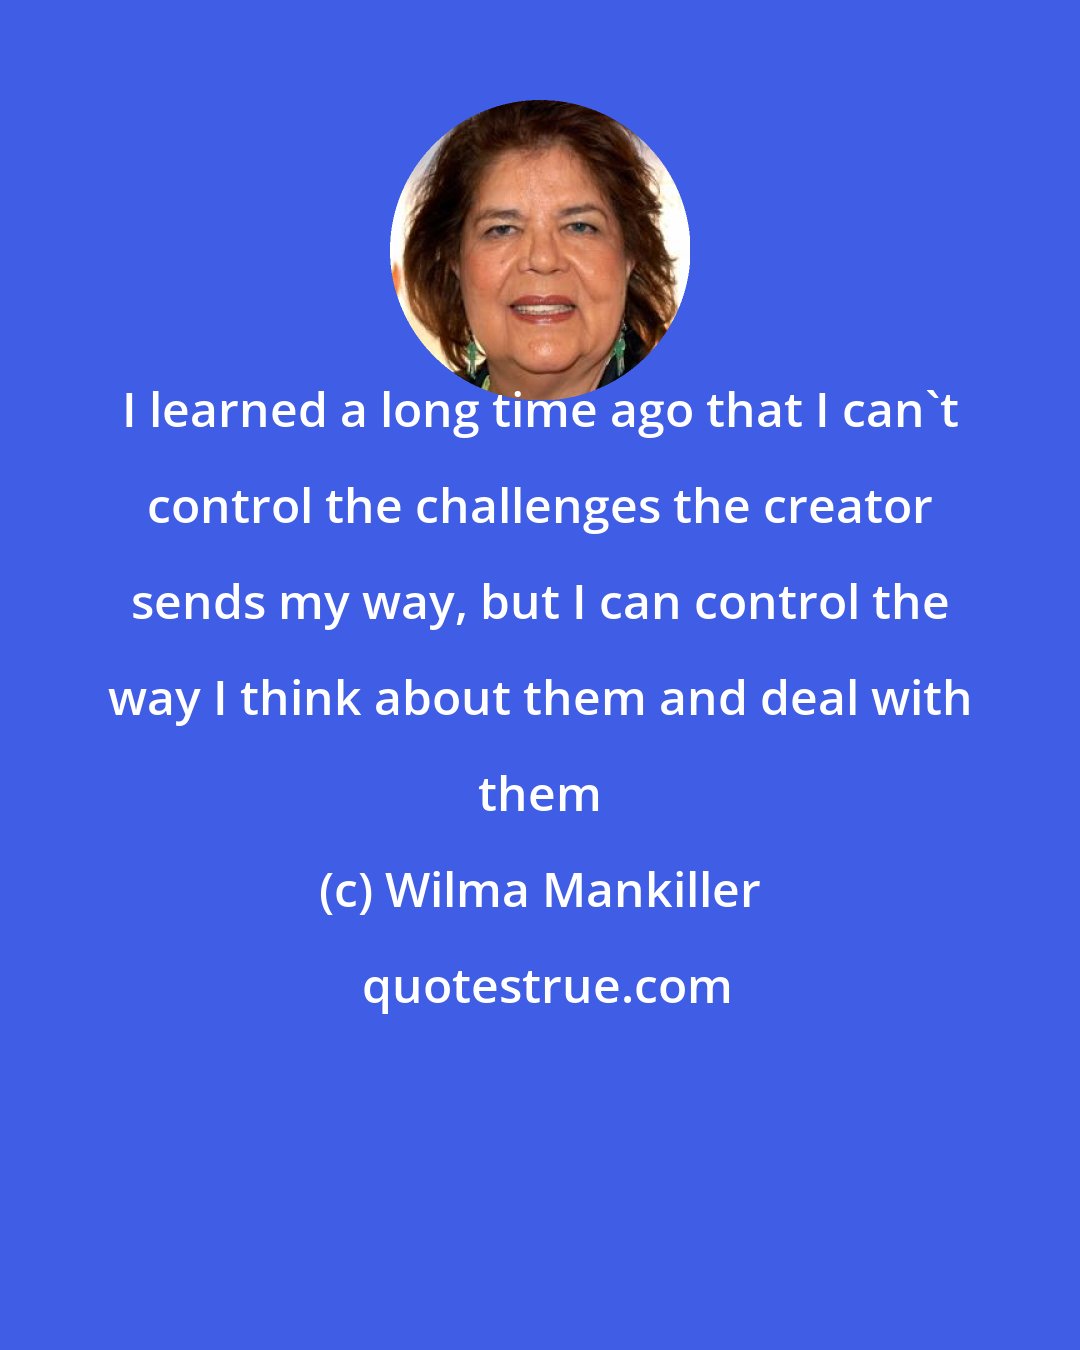 Wilma Mankiller: I learned a long time ago that I can't control the challenges the creator sends my way, but I can control the way I think about them and deal with them